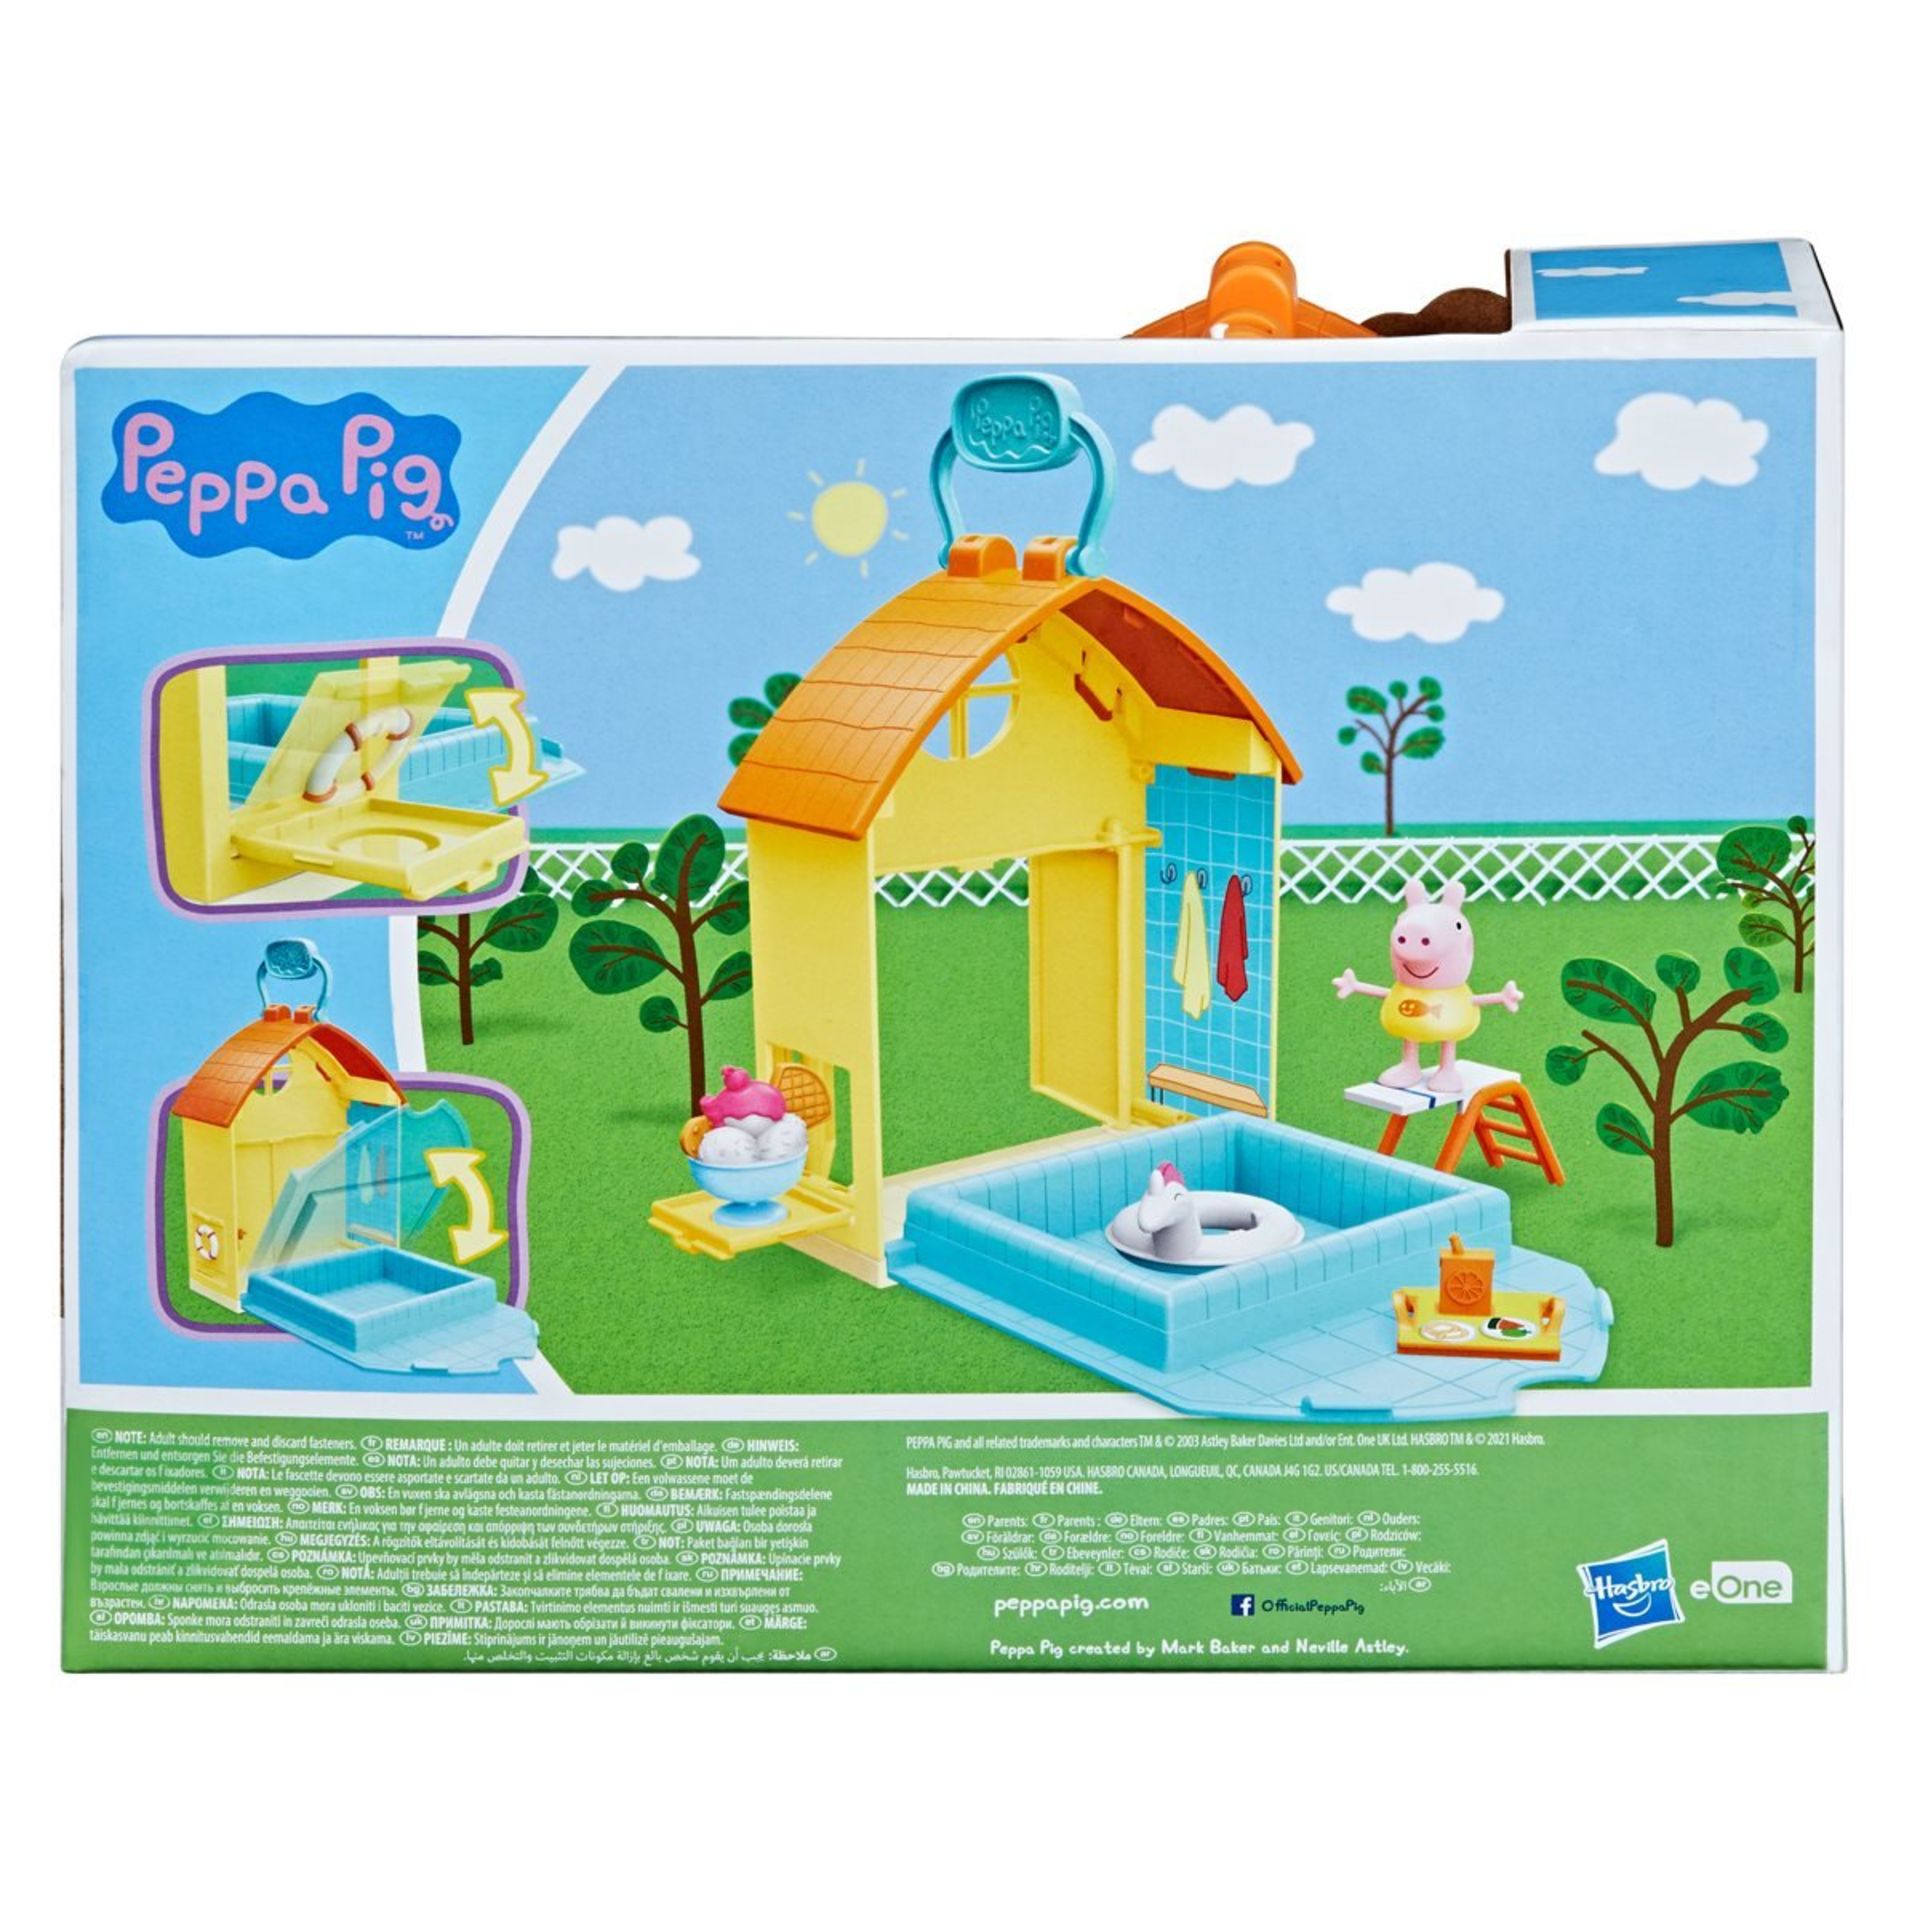 50X NEW PEPPAS SWIMMING POOL FUN - MAIL ORDER PACKAGING - Image 8 of 11